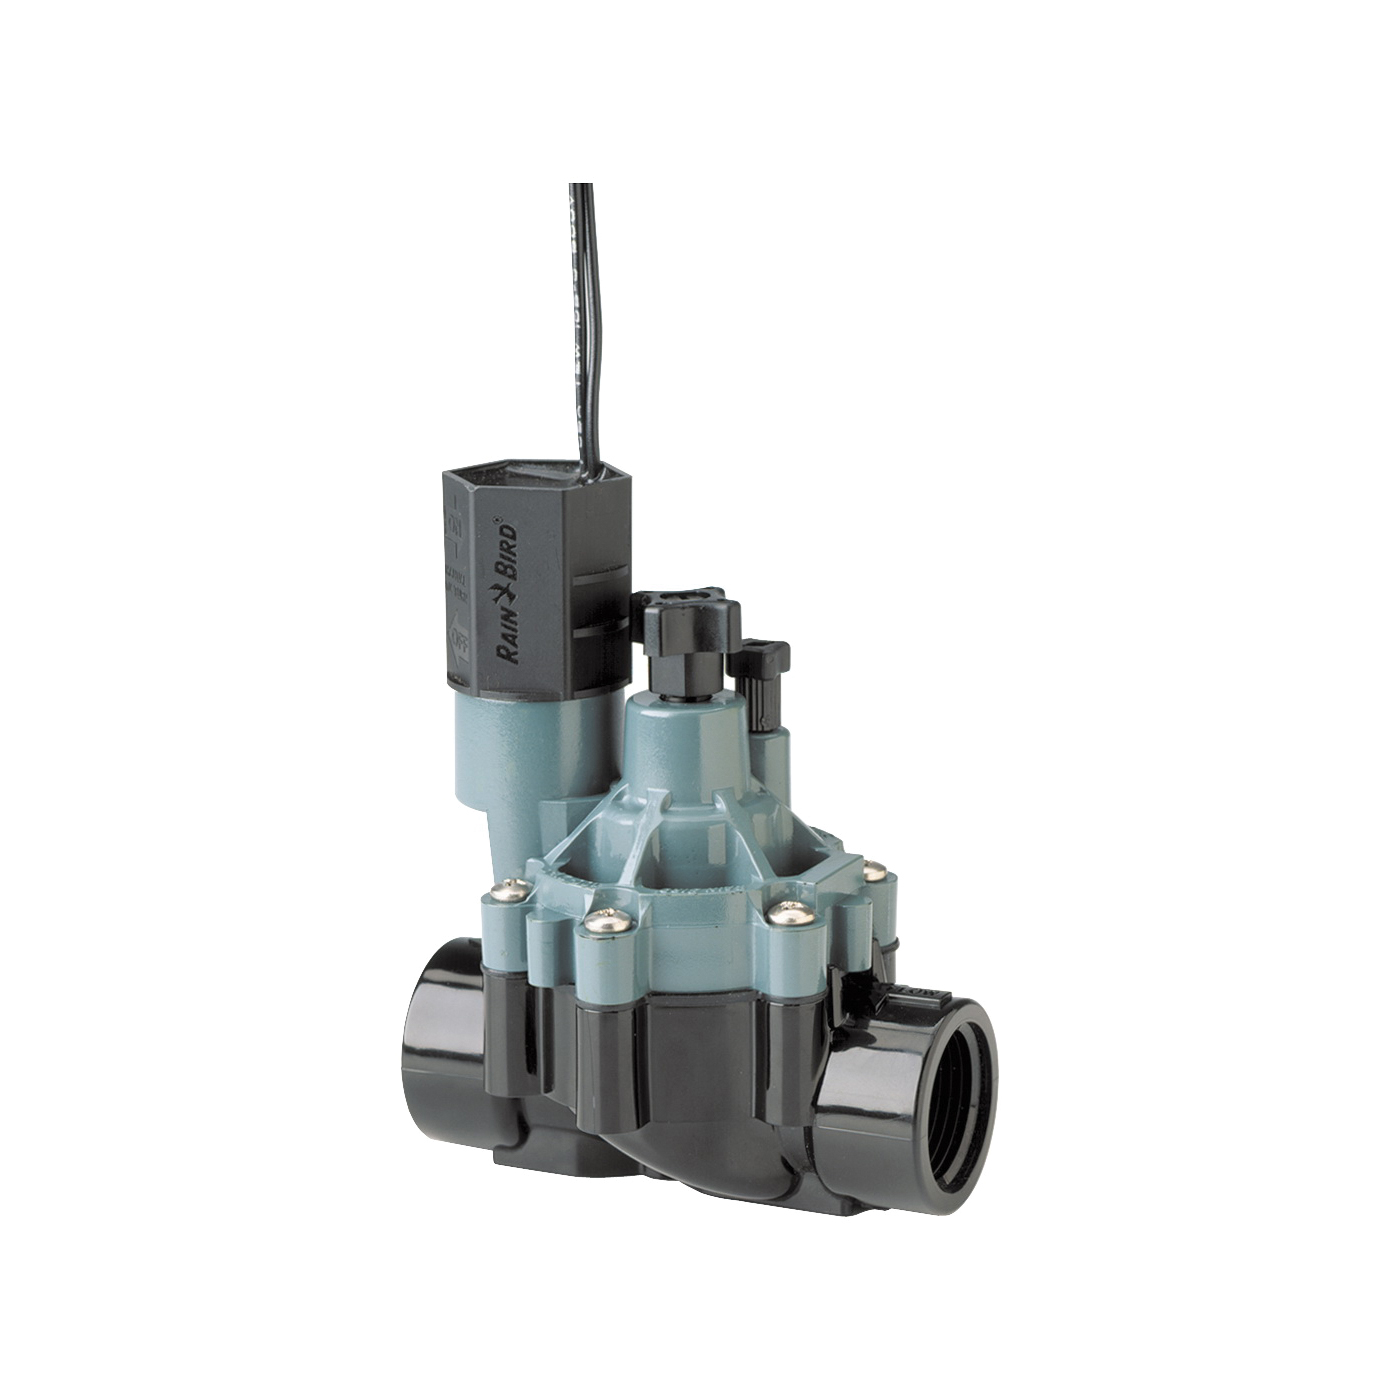 CPF075 Sprinkler Valve with Flow Control, 30 A, 24 V, 3/4 in, FNPT x FNPT, 0.2 to 22 gpm, Plastic Body